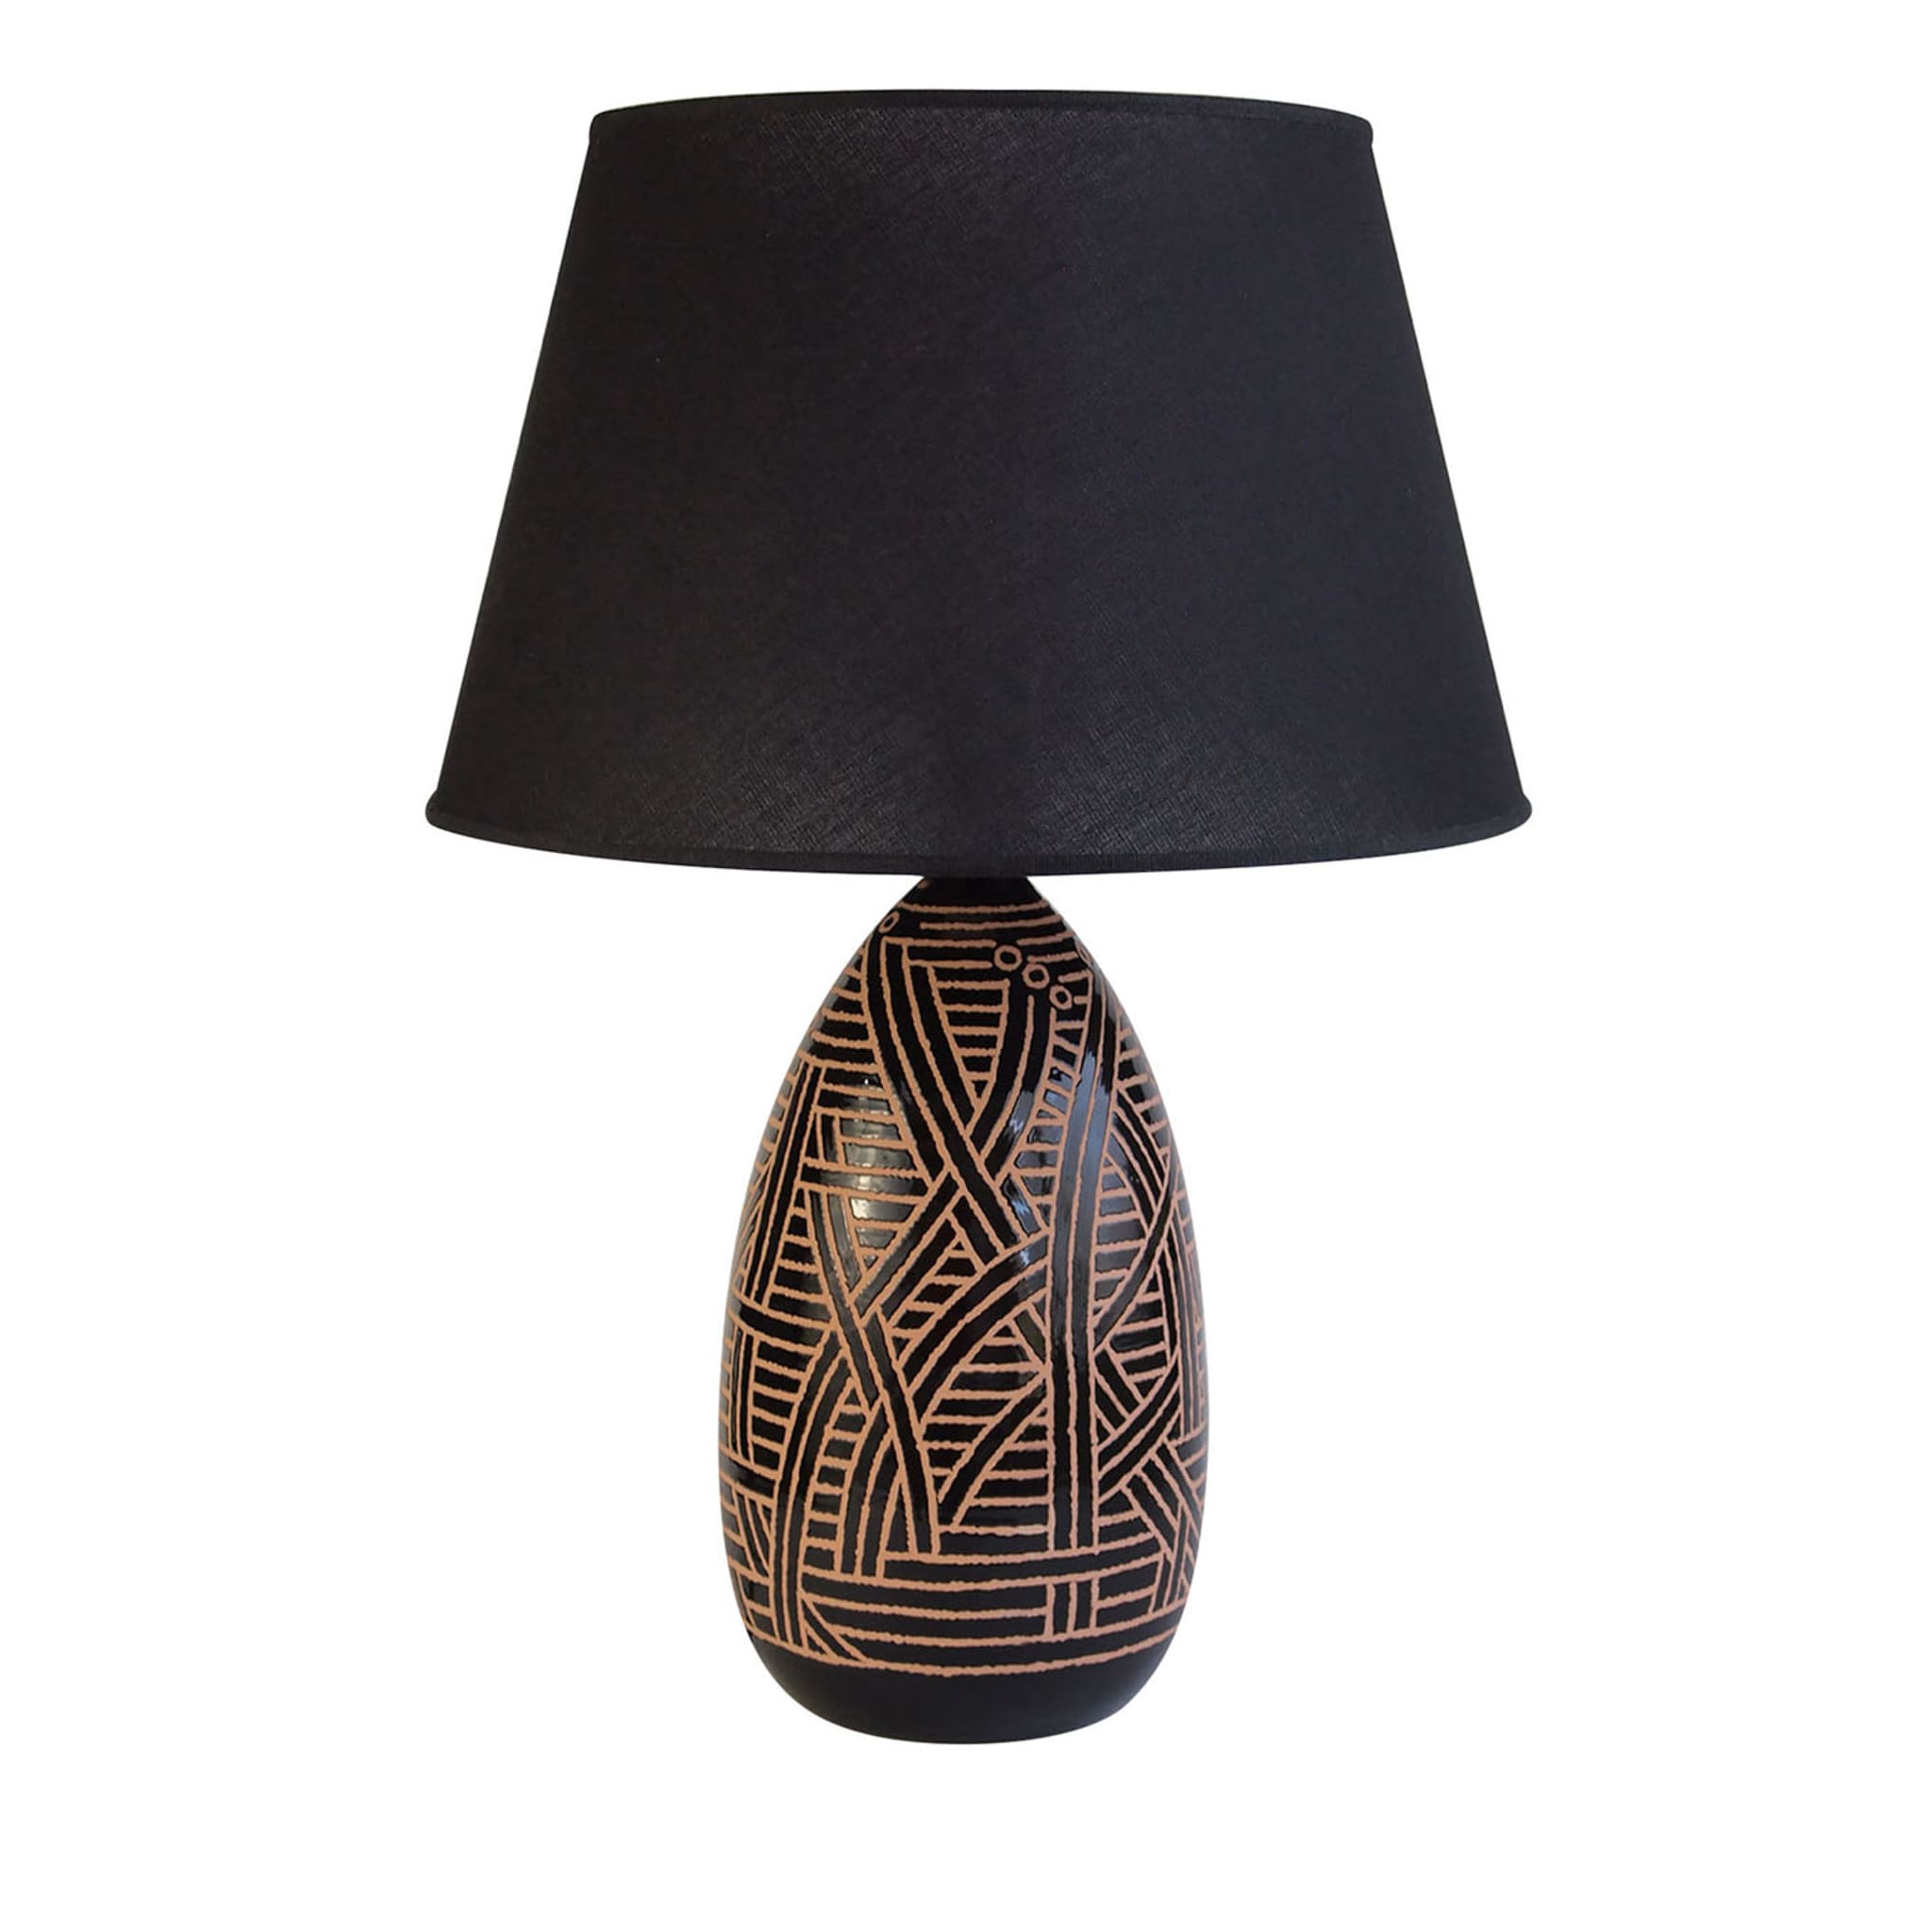 Patterned Black & Terracotta Table Lamp - Main view